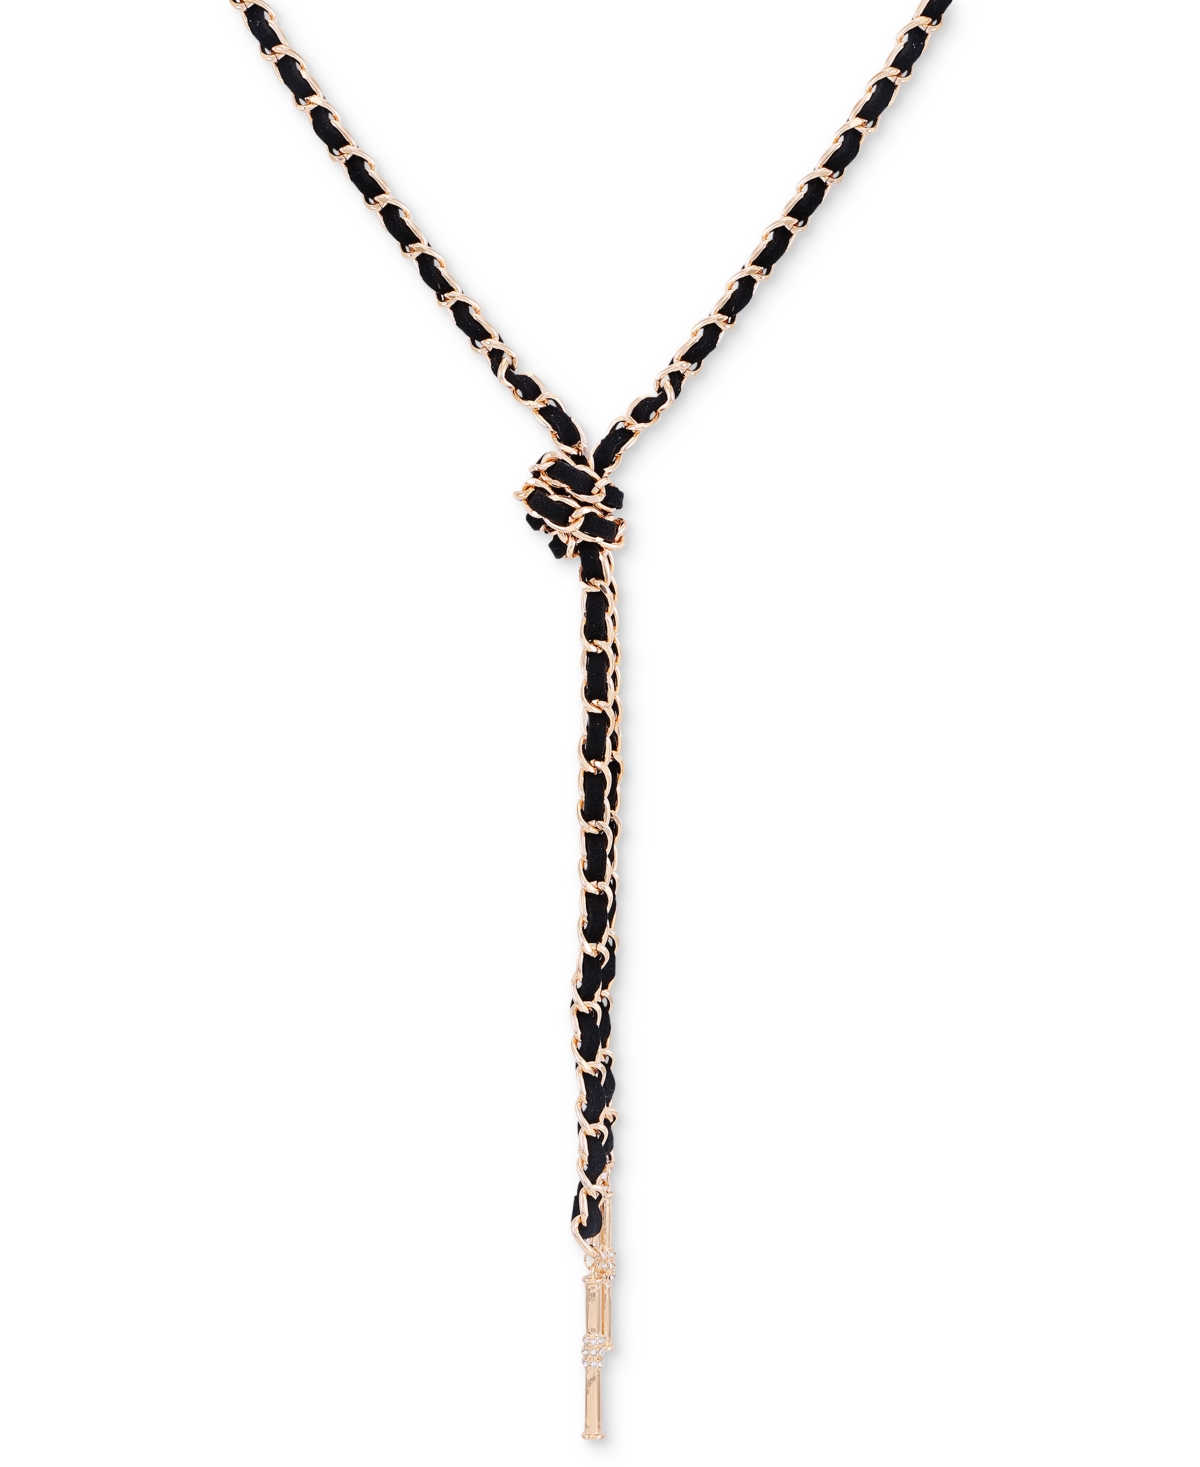 Guess Gold-tone Imitation Suede Woven Link Long Lariat Necklace, 32" + 2" Extender